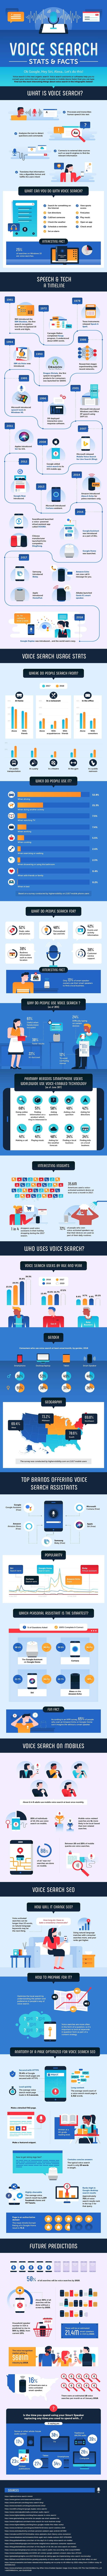 Voice Search Stats & Facts